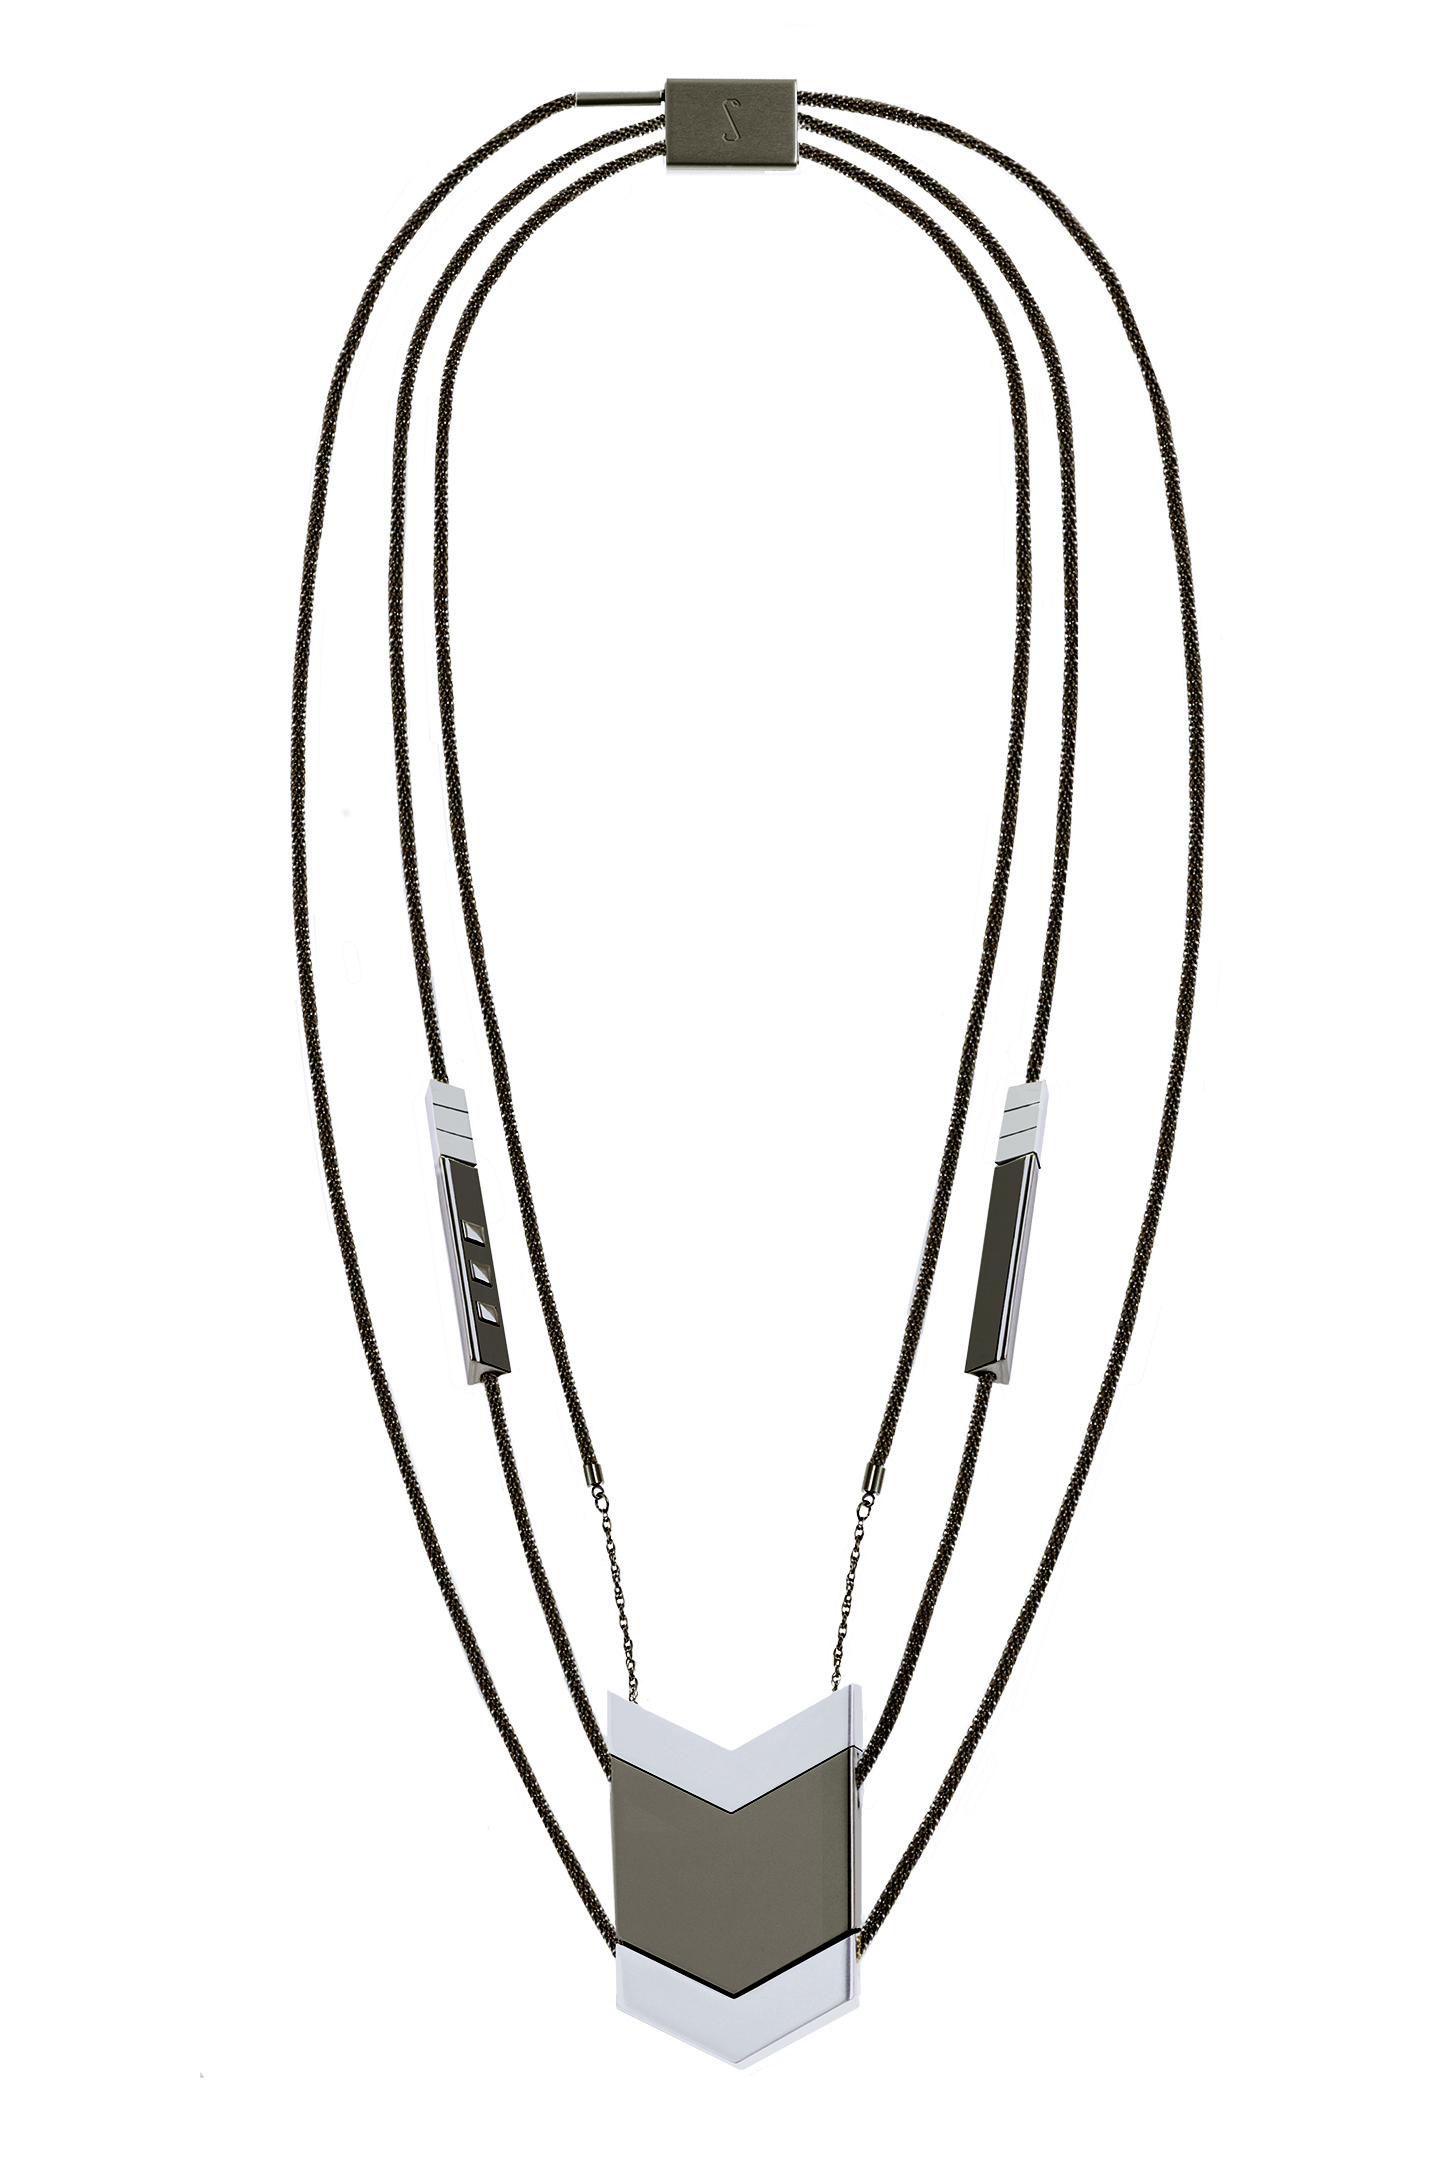 Tinsel- The Dipper Audio Necklace in Gunmetal, tinsel.me